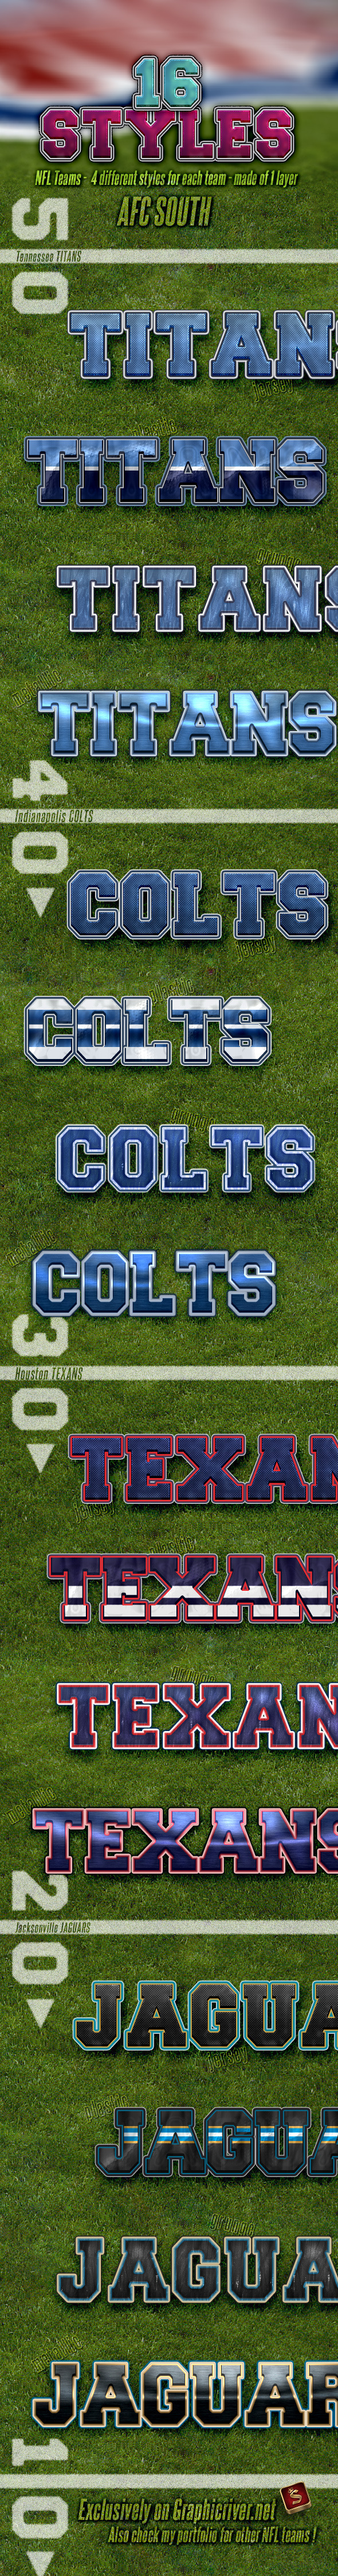 NFL Football Styles - AFC South